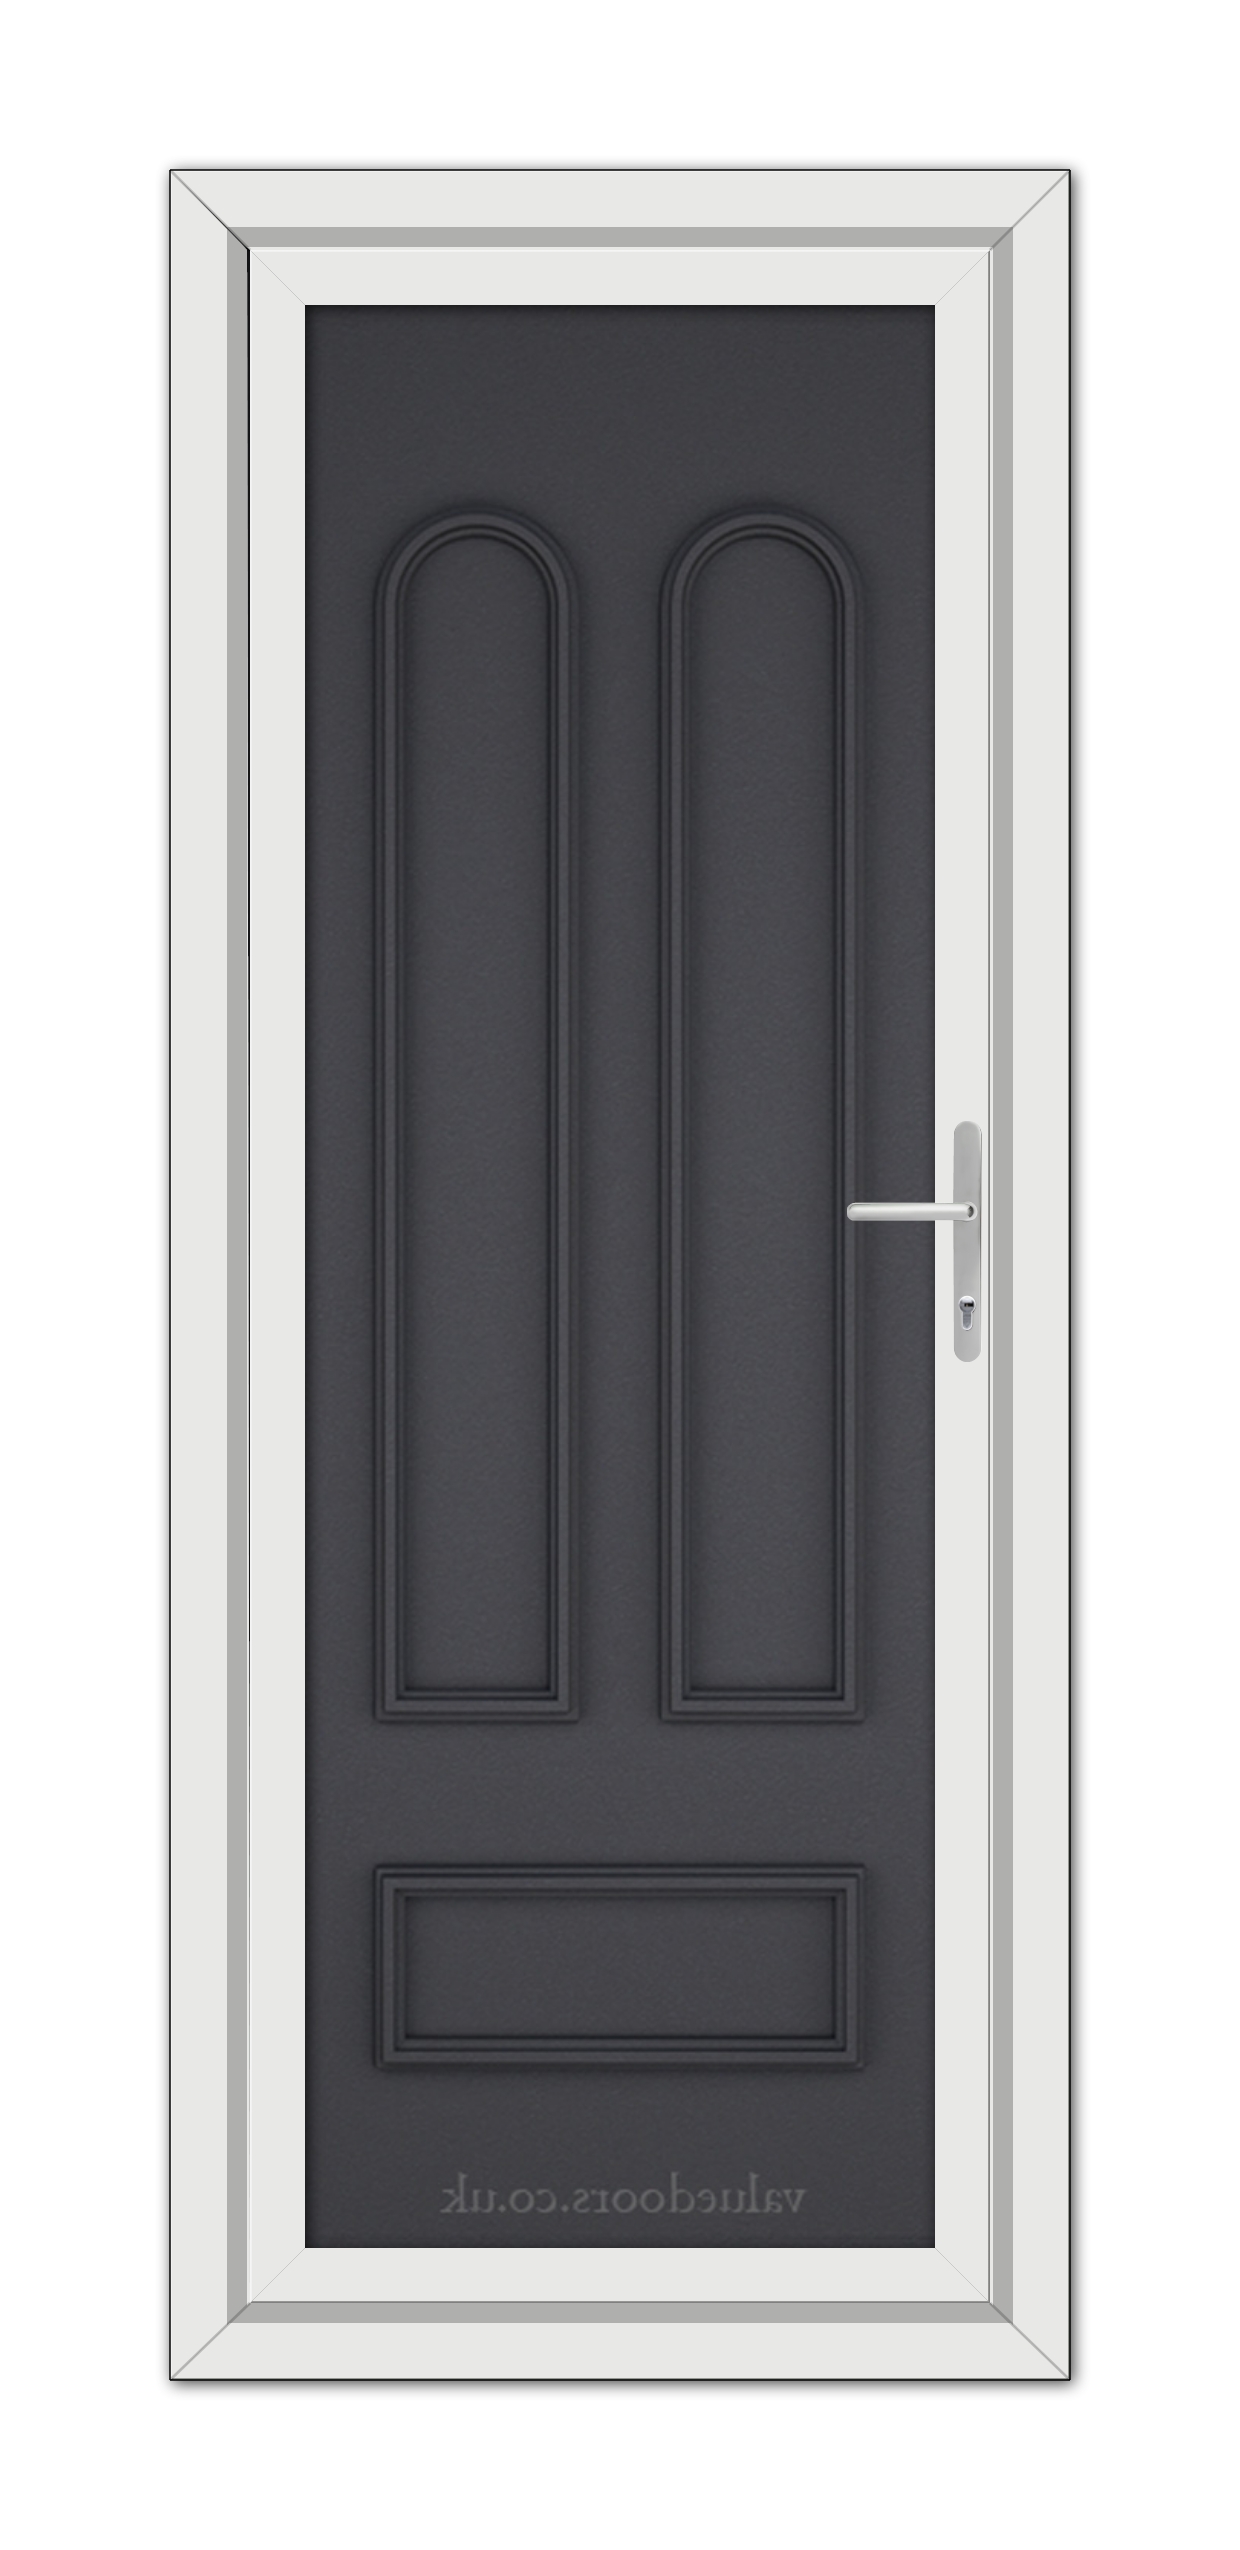 A modern Grey Grained Madrid Solid uPVC Door with two vertical panels and a silver handle, framed by a white door frame.